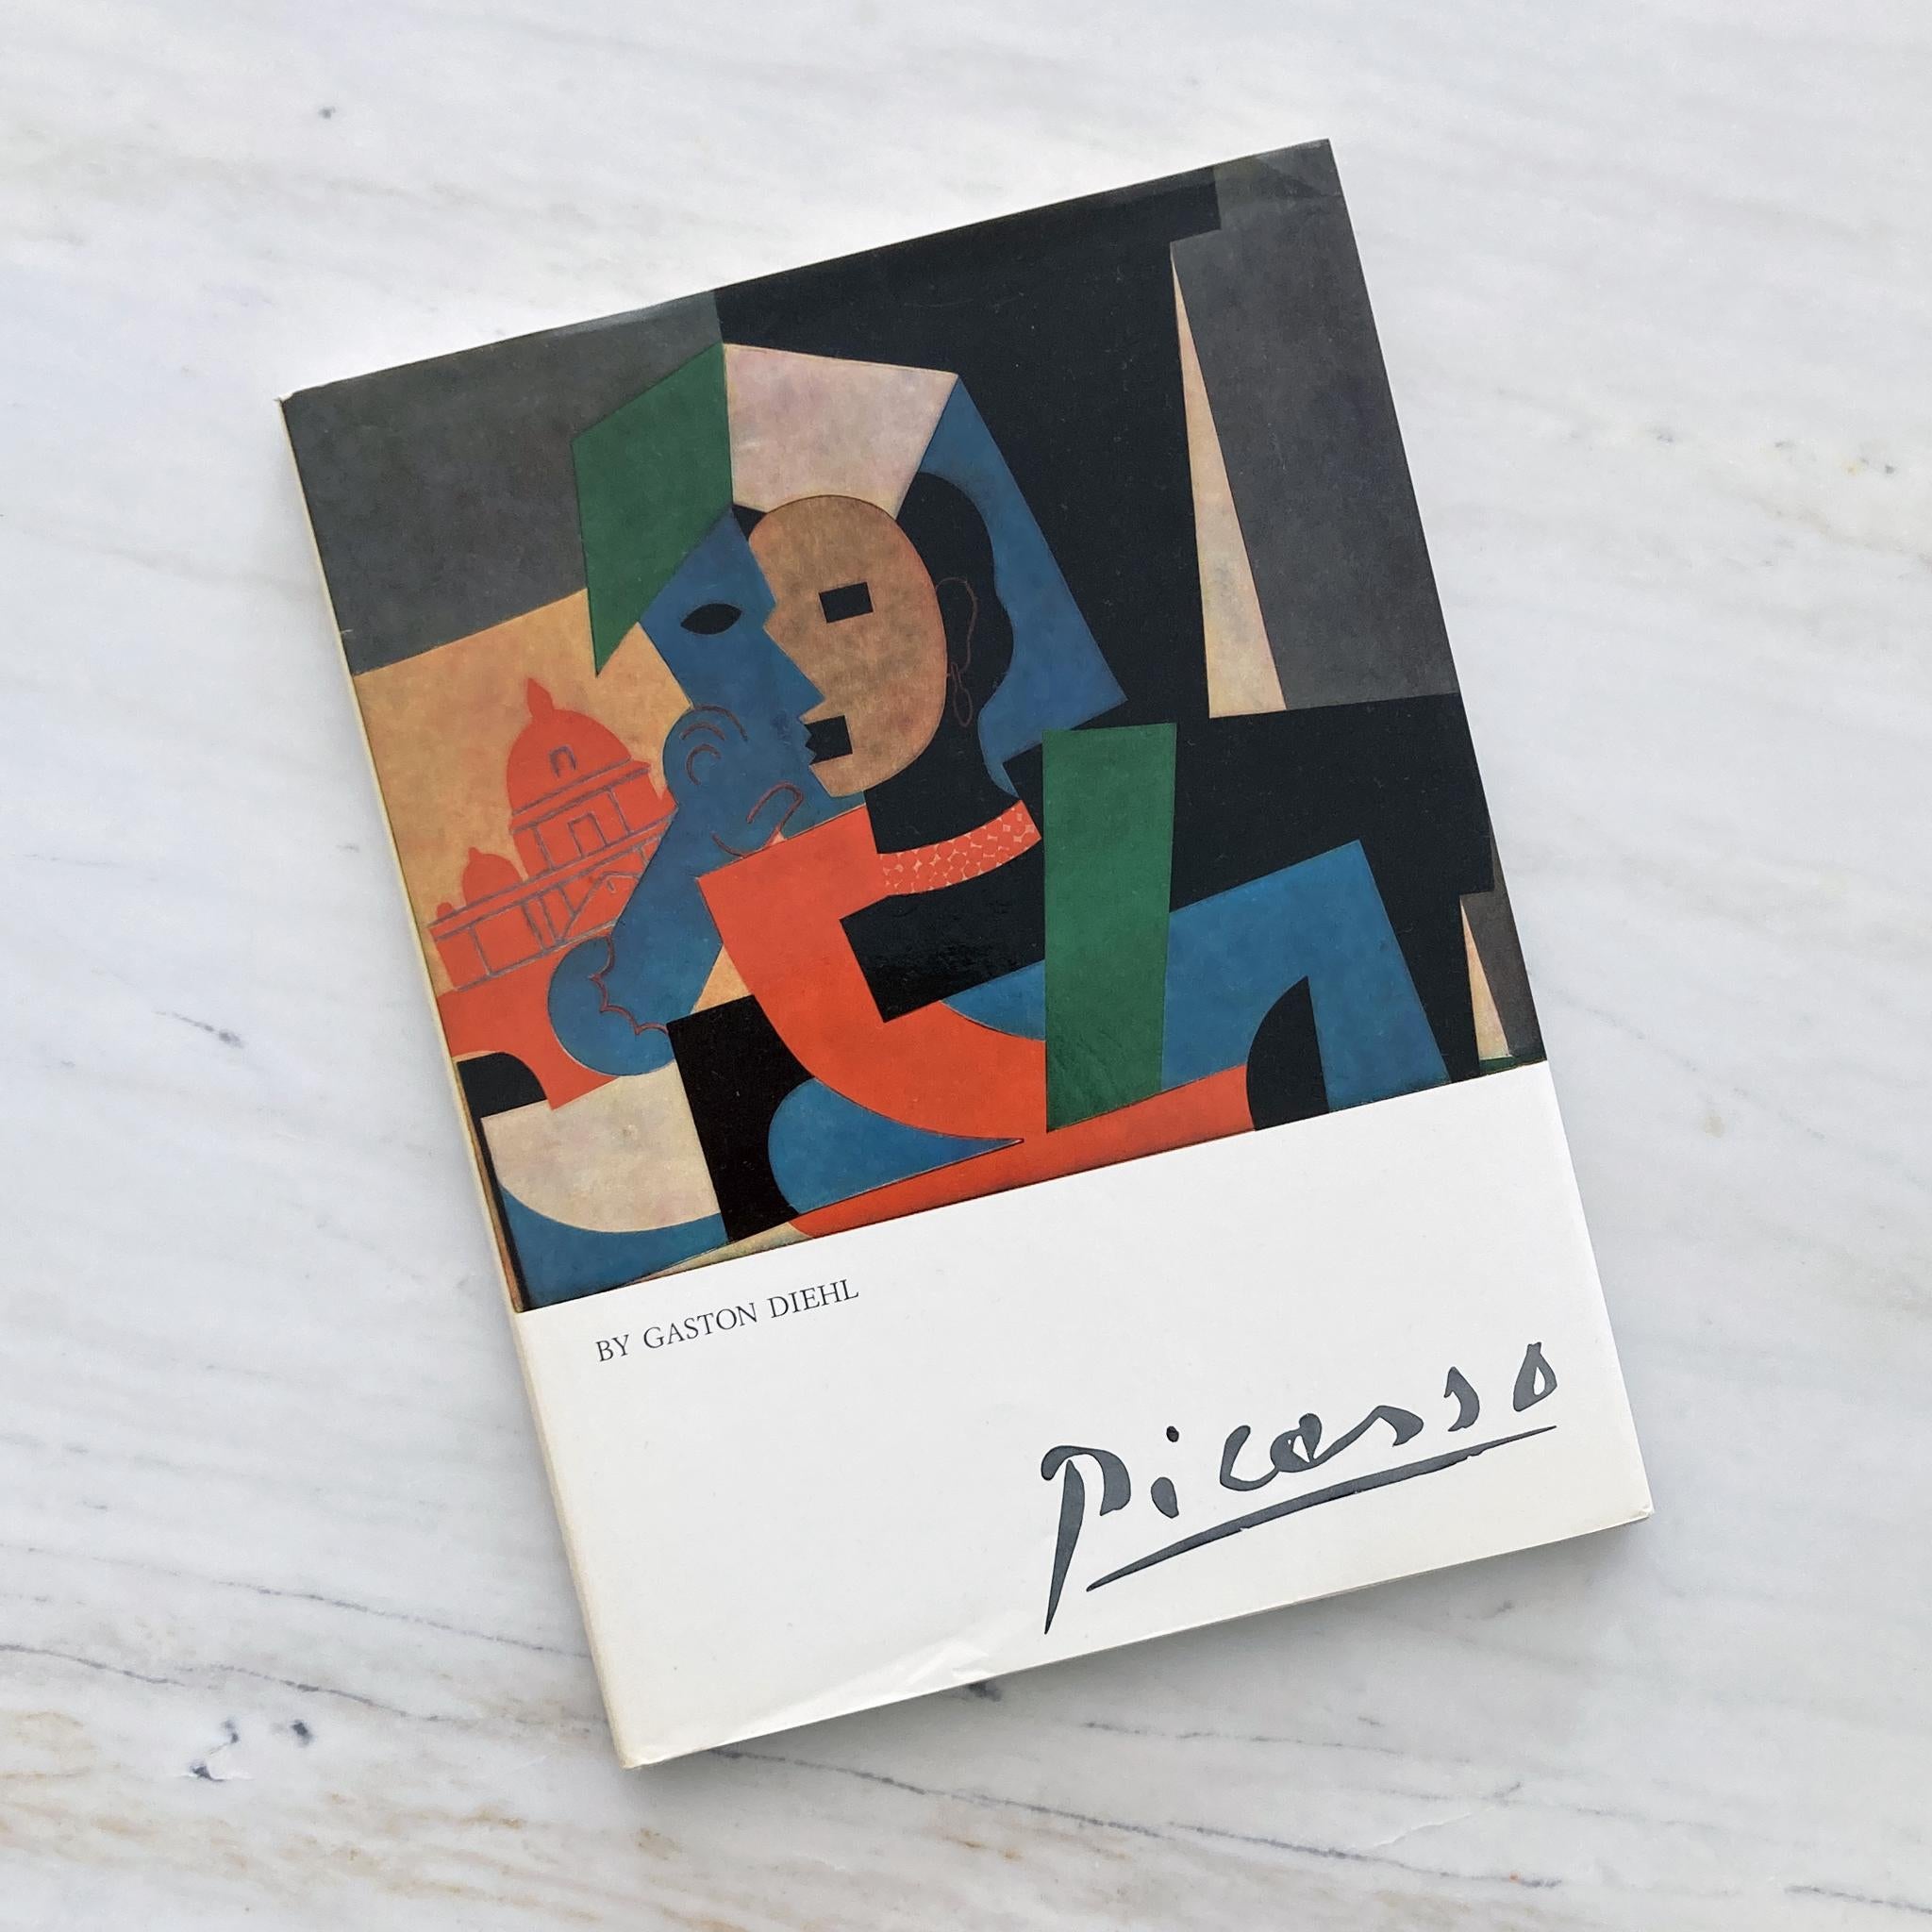 Hardcover book of Picasso illustrations and paintings by Gaston Diehl, Bonfini Press 1977, printed in Italy. Text in English.

This book explores the many contributing elements to Picasso's brilliant body of work. Gaston Diehl, art critic and